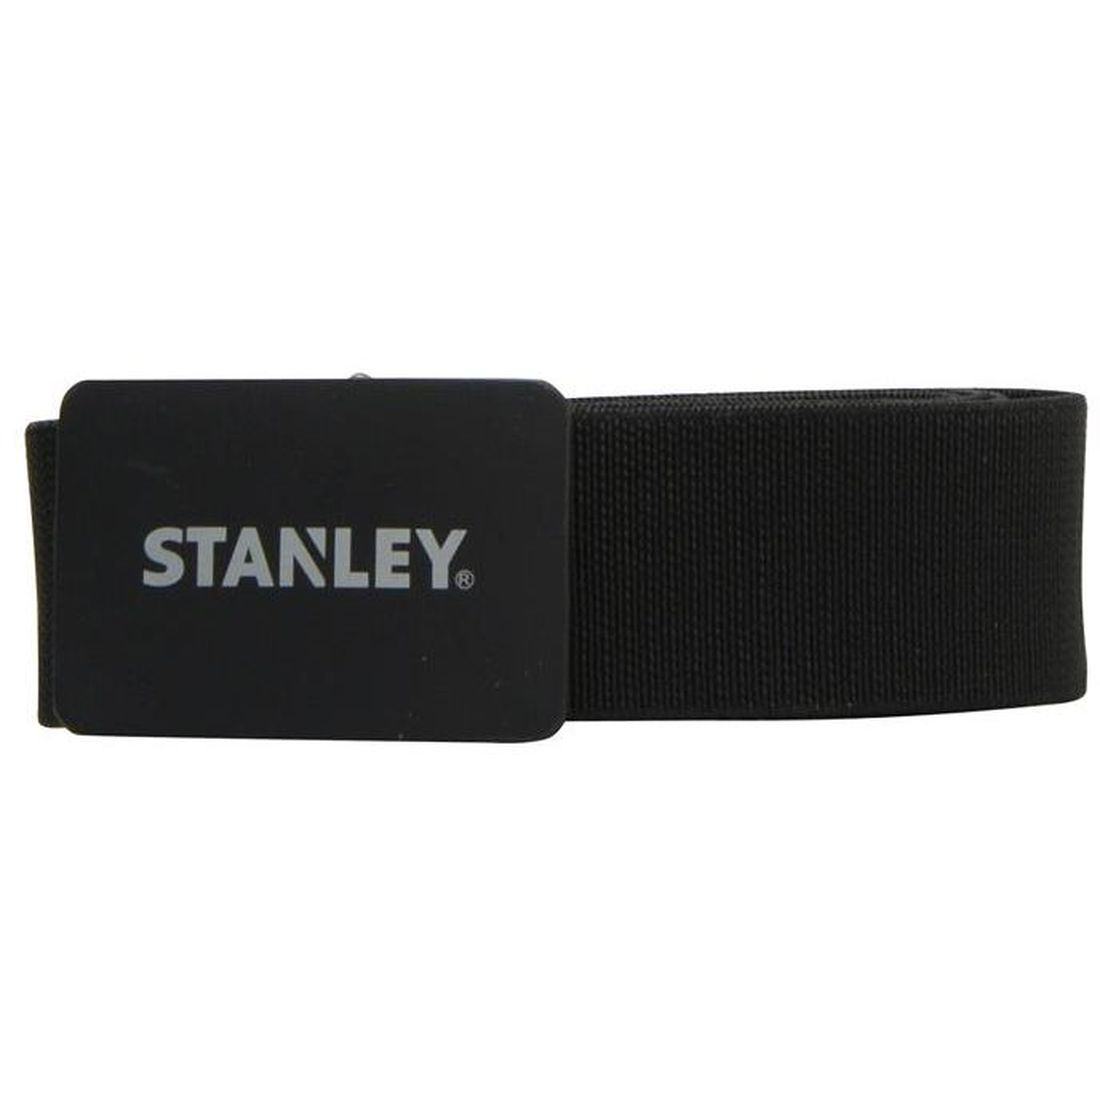 STANLEY Elasticated Belt One Size         